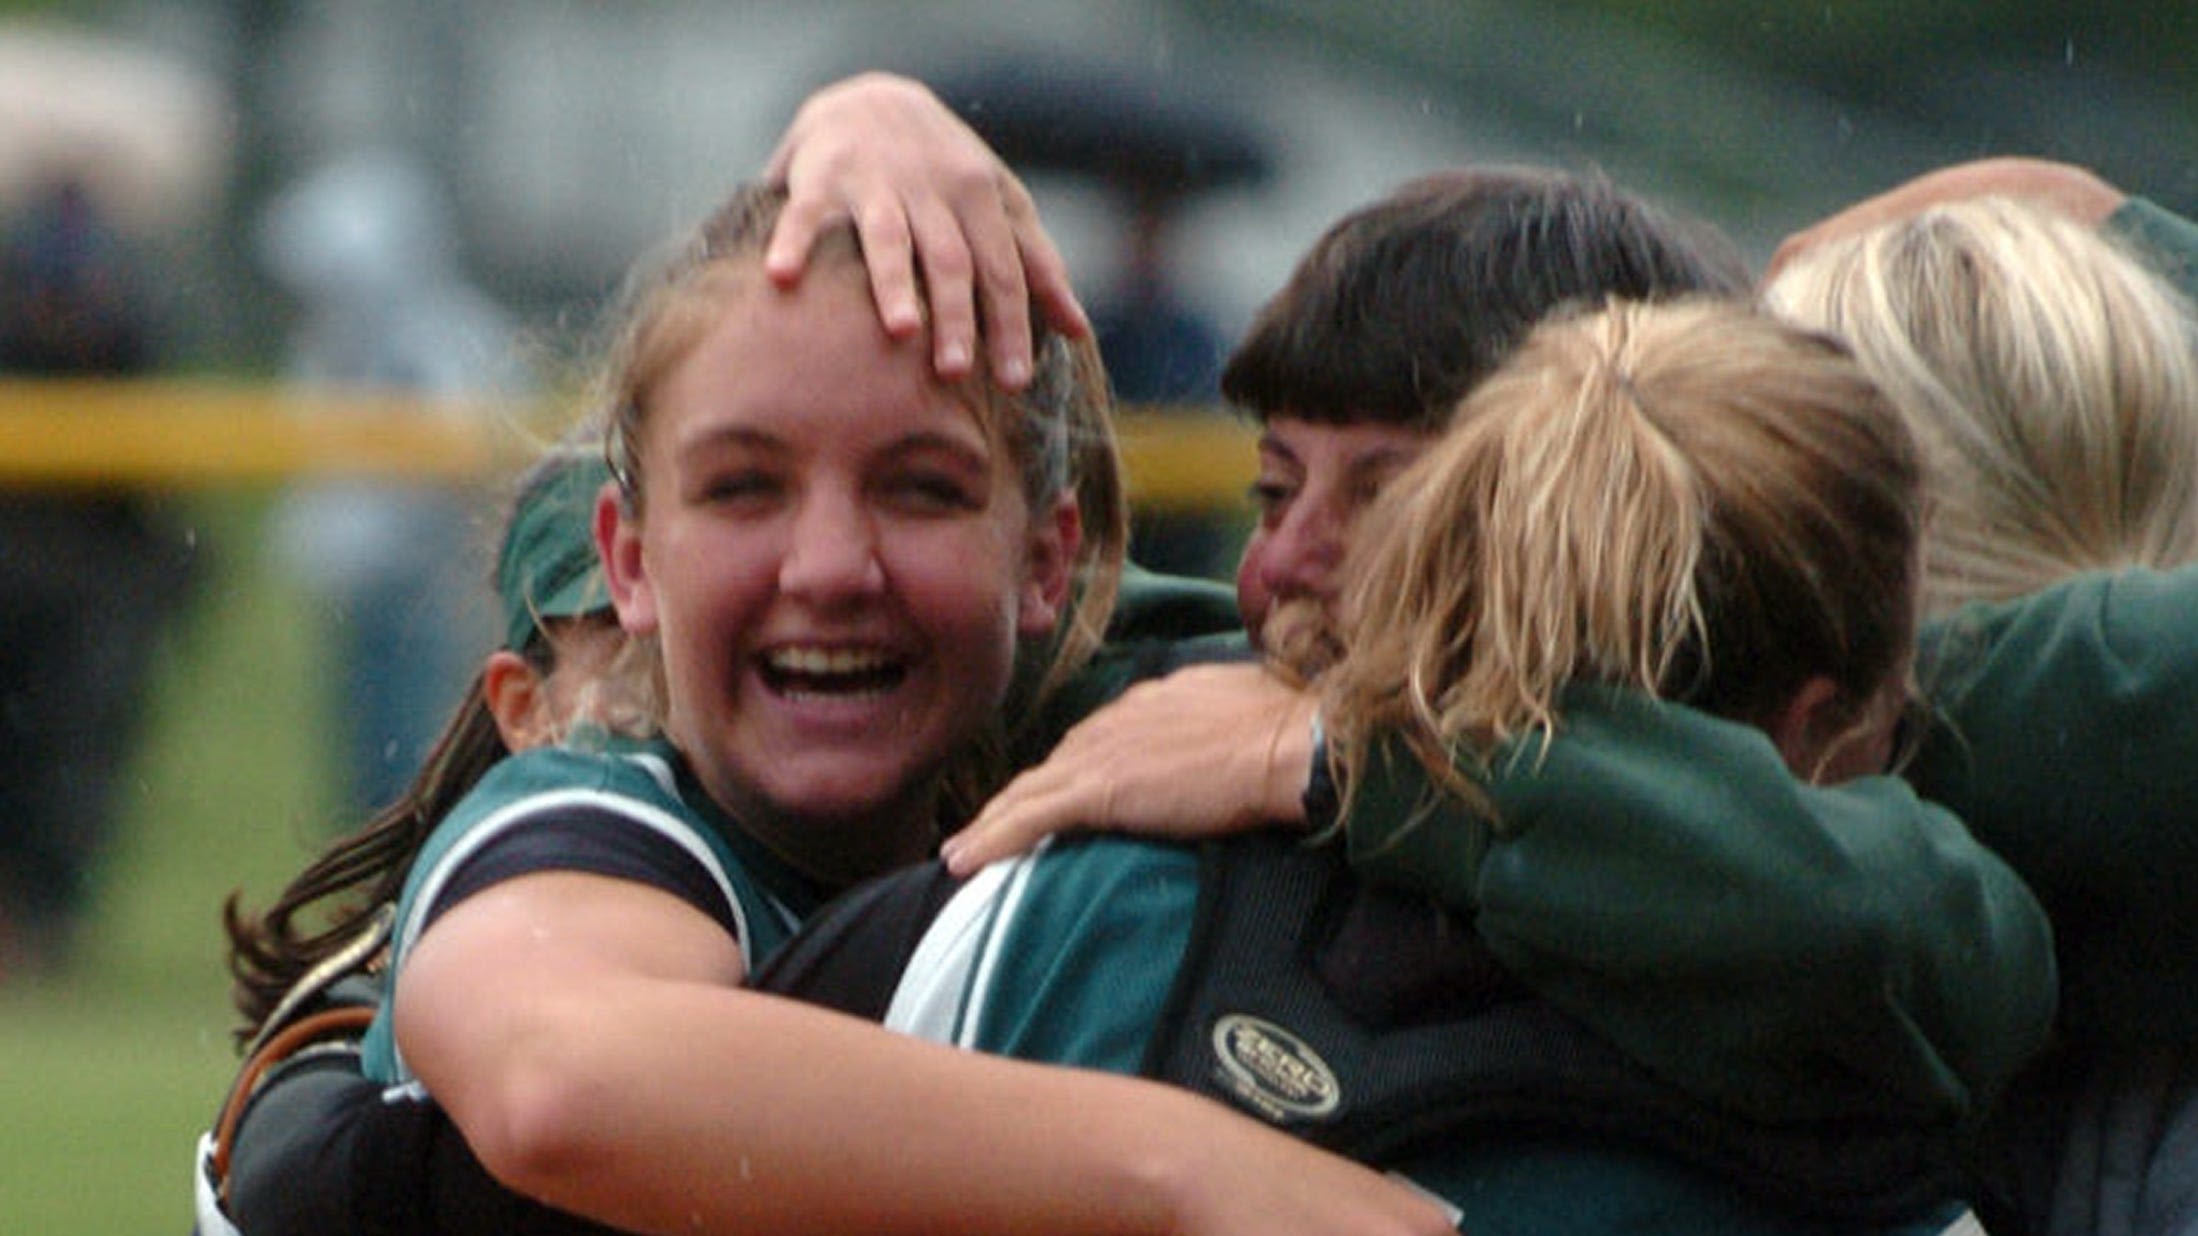 As the Bergen County softball tournament turns 50, remembering the wildest tournament ever